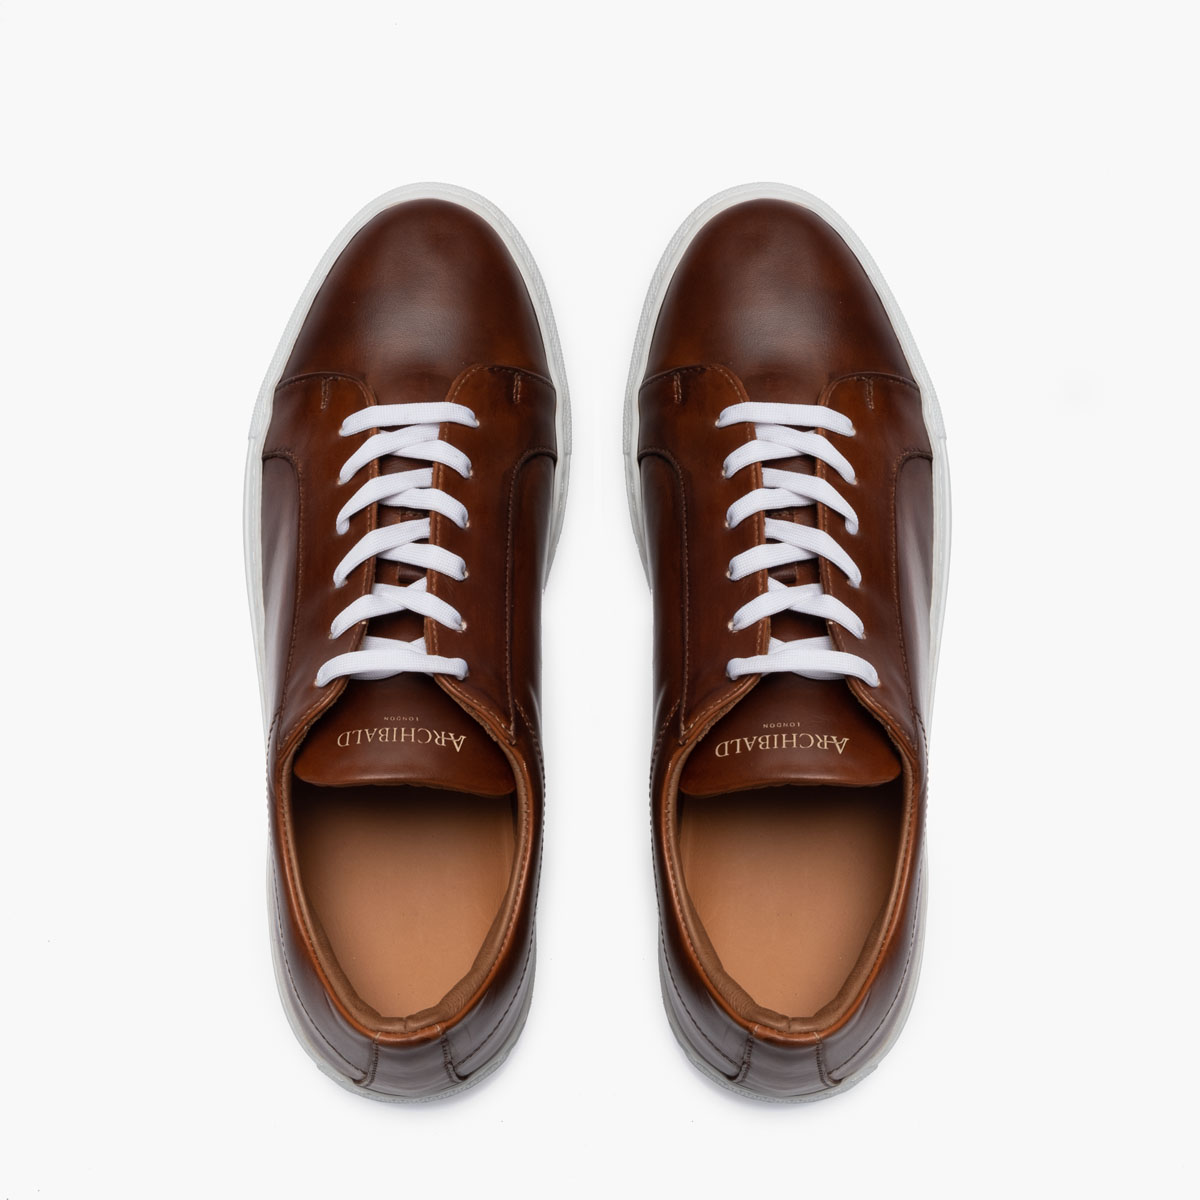 The Ghirlandina Low-Top Anticato Leather Sneakers v1 (Discontinued)